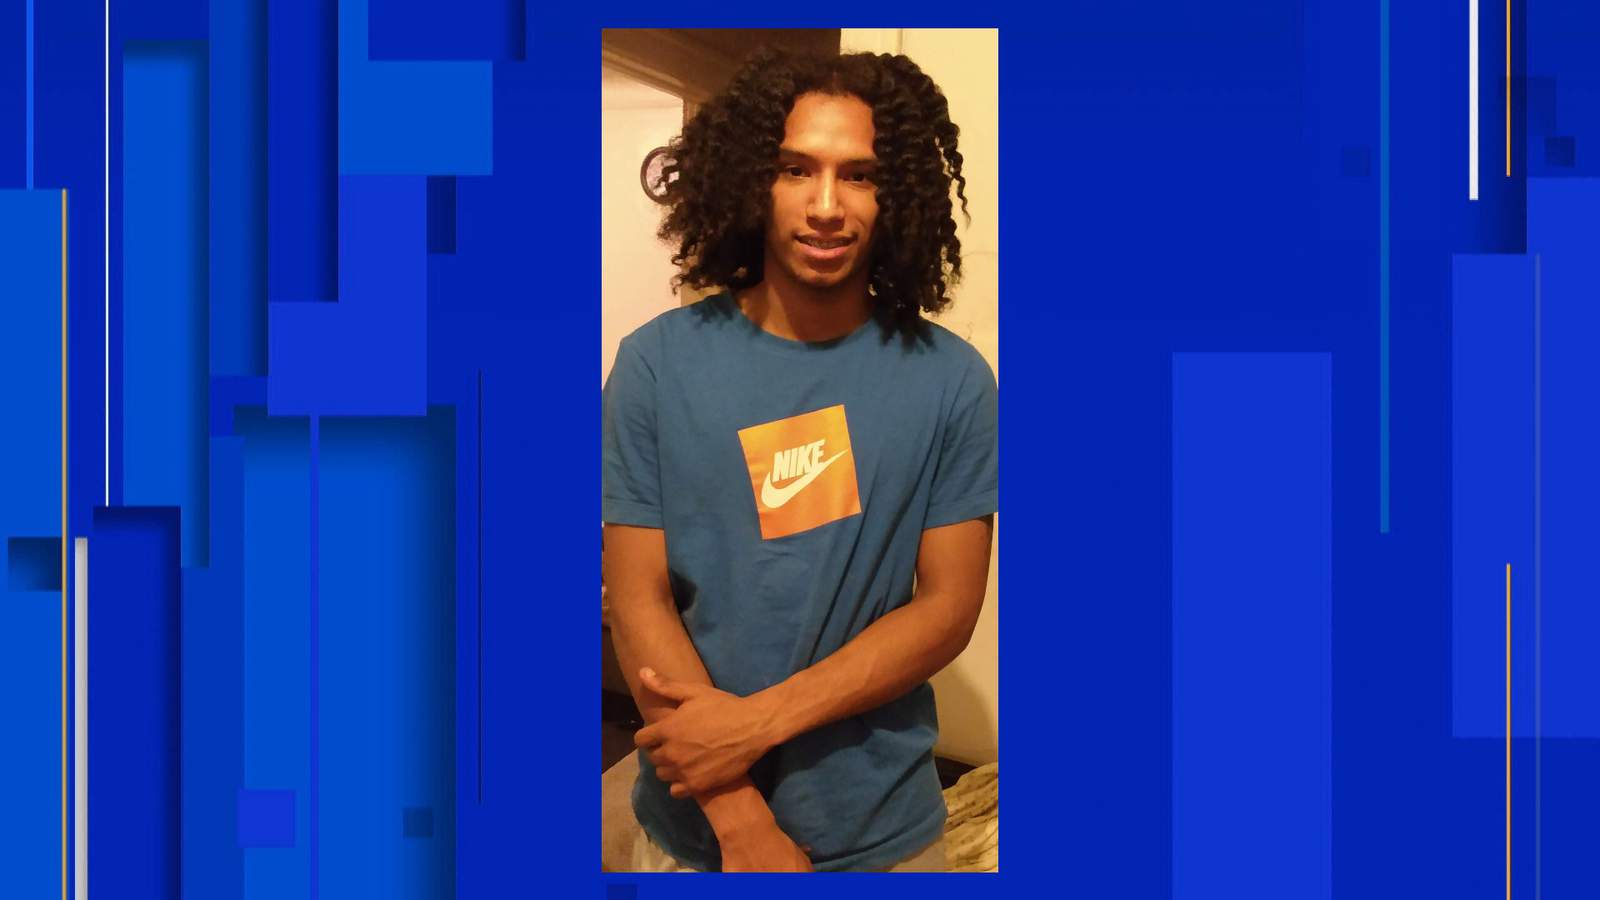 Detroit police search for 19-year-old missing since Dec. 18